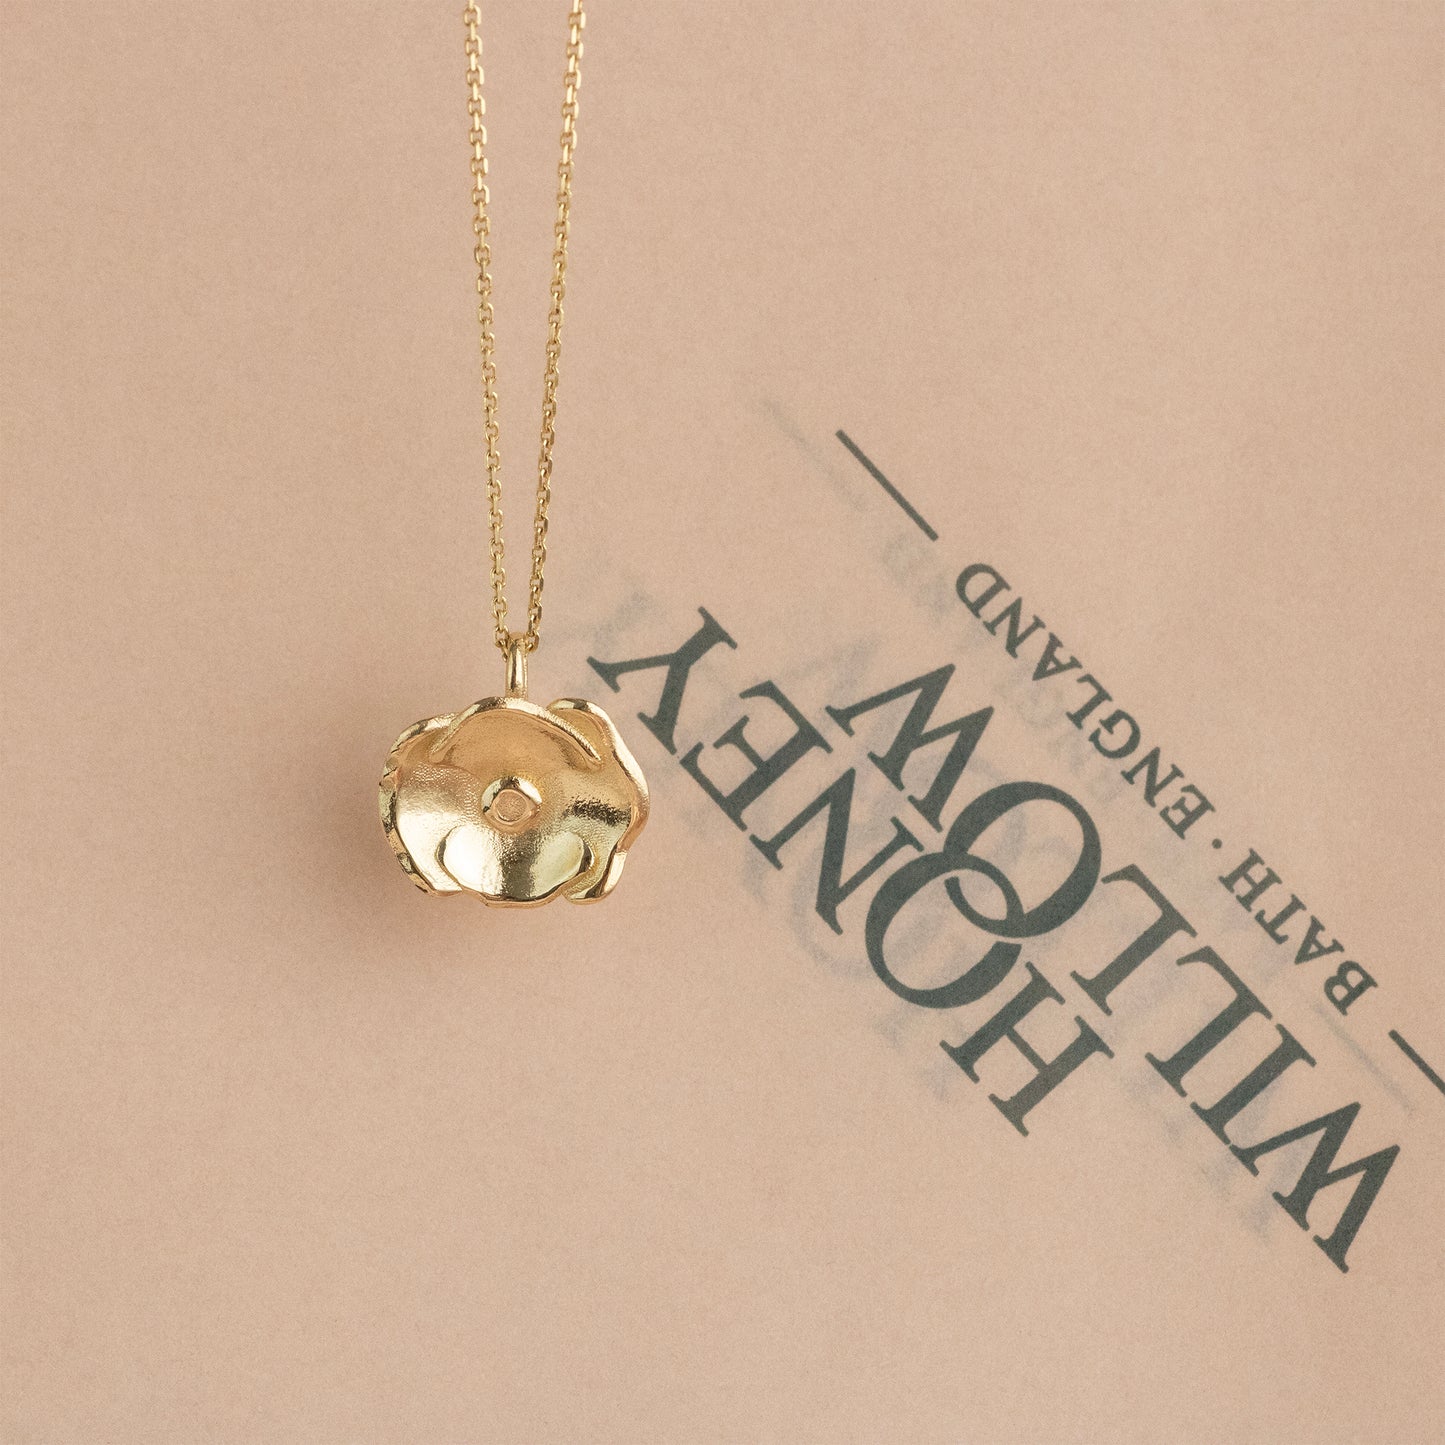 9th Anniversary Gift - Poppy Flower Necklace - 9kt Gold